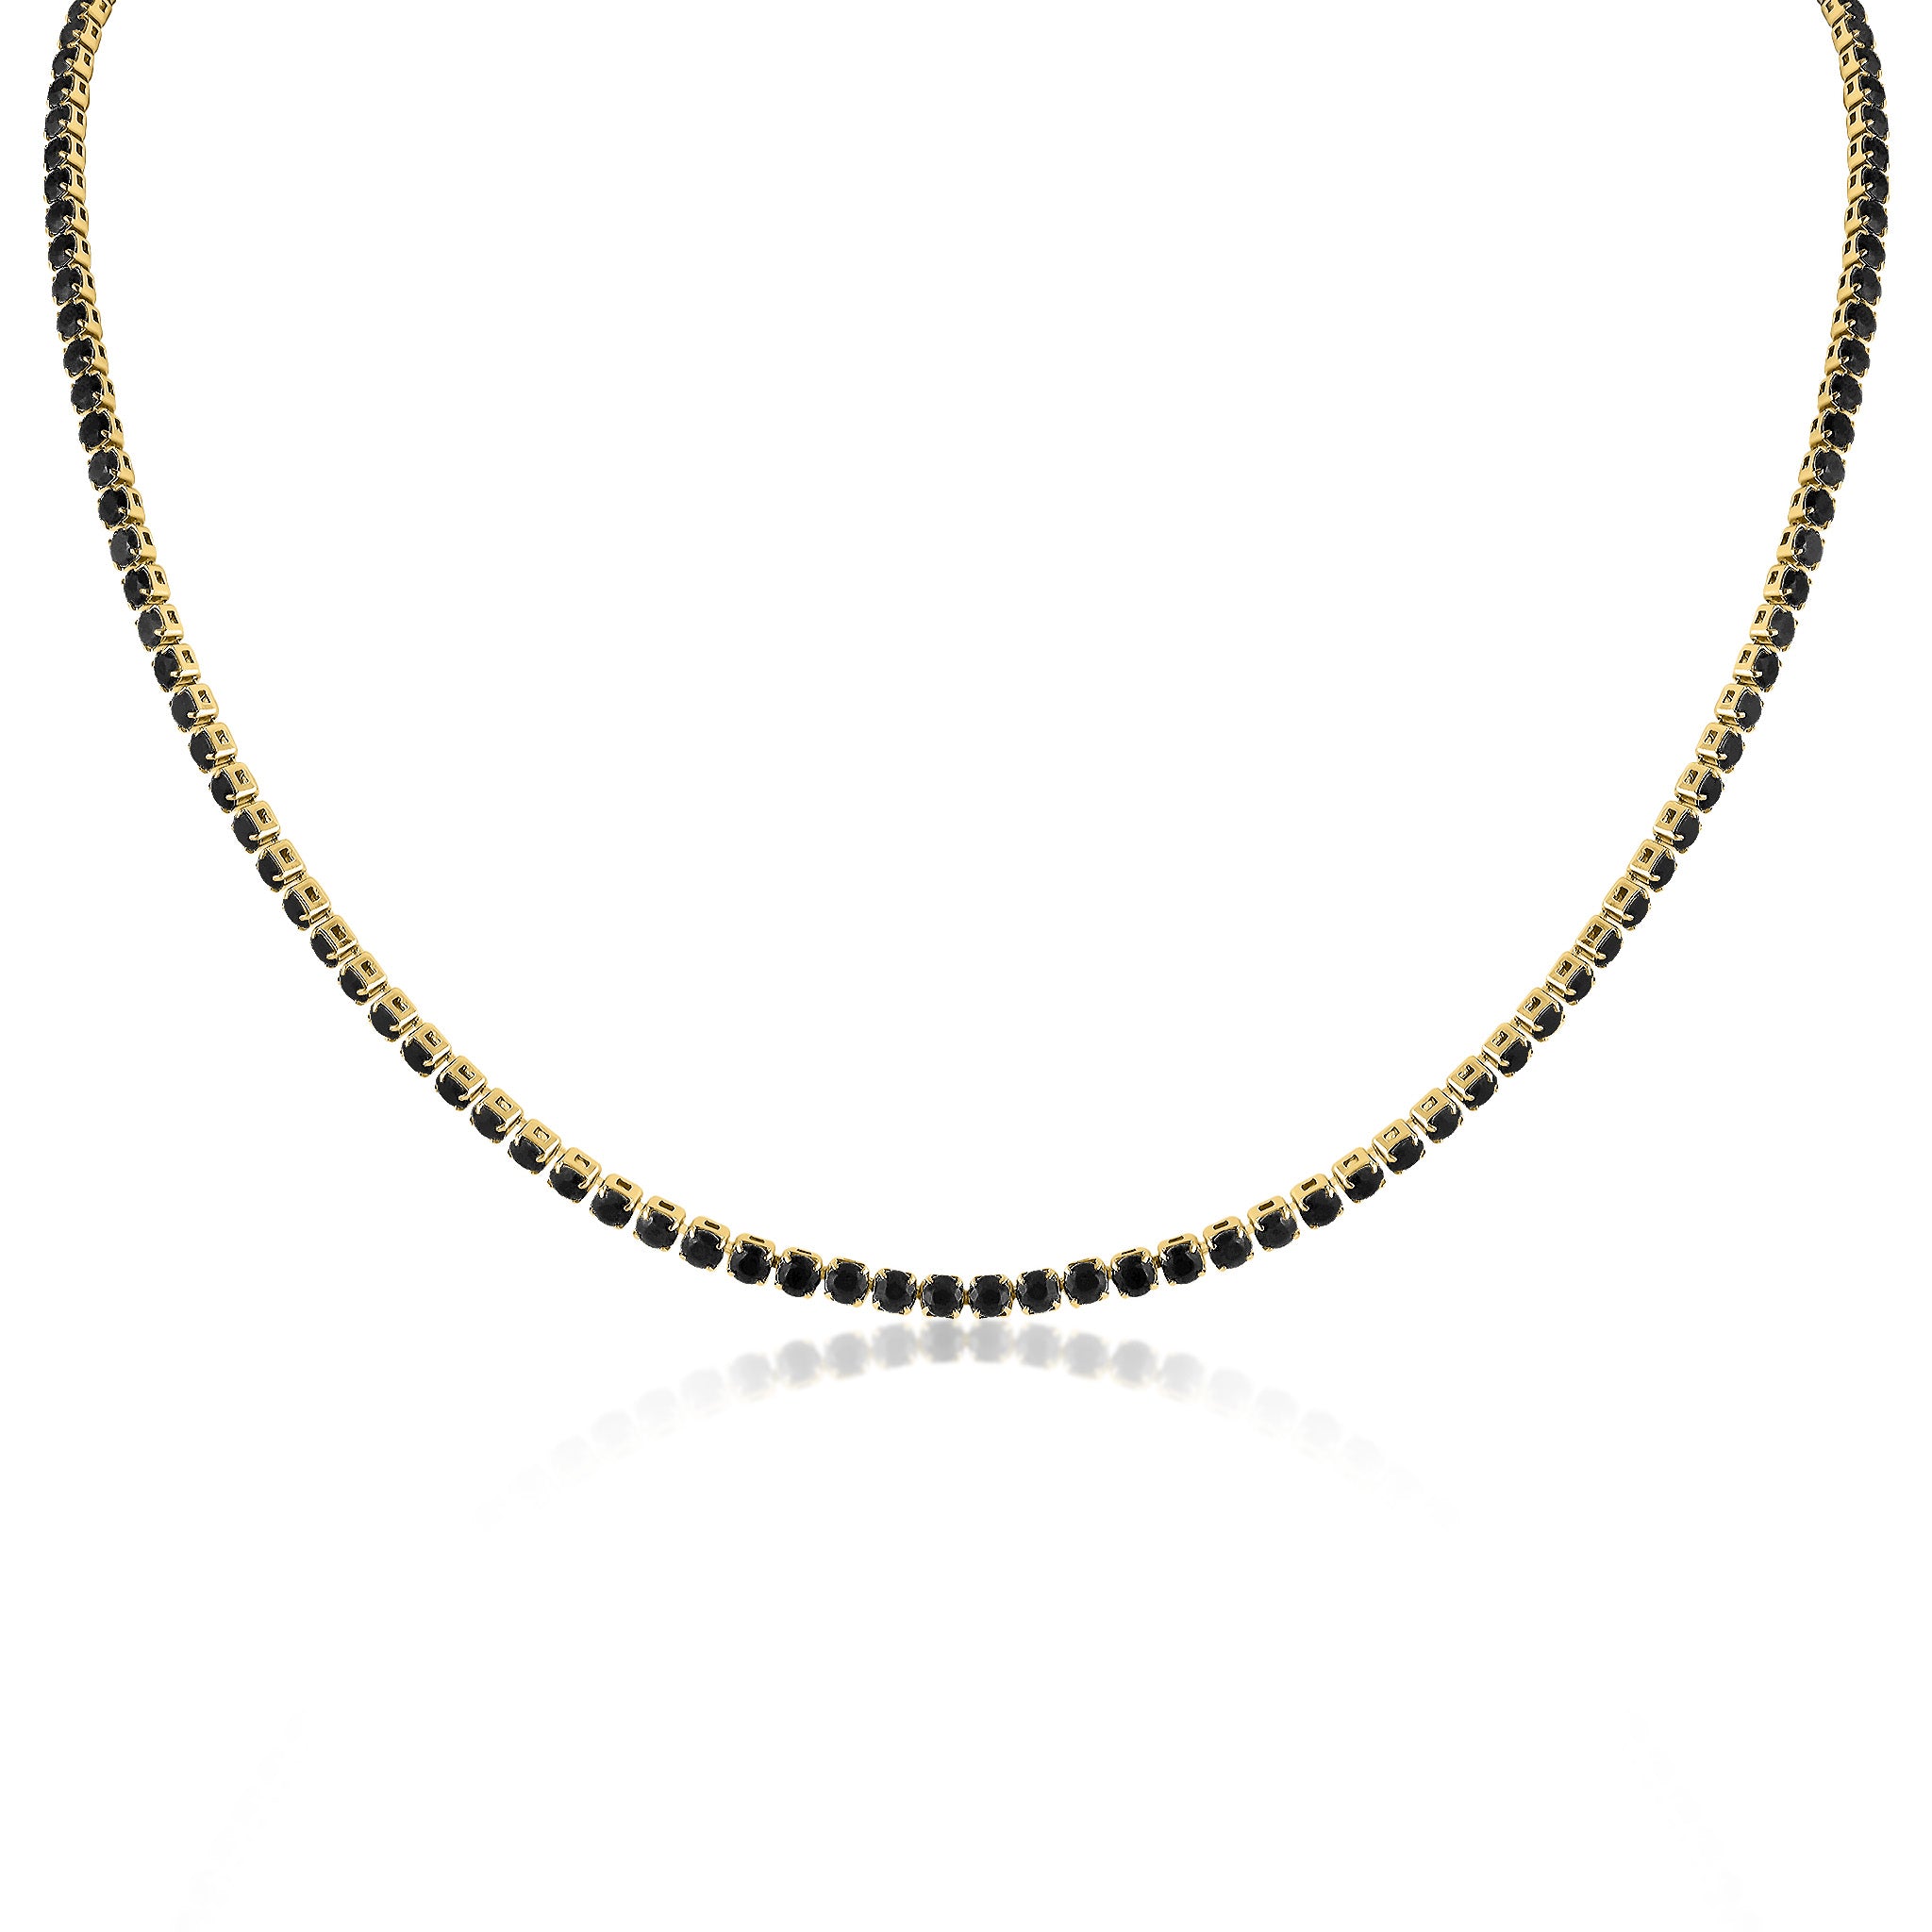 18k Gold PVD Coated Stainless Steel Jet Rhinestone Tennis Chain Necklace With 2" Extension / TNN0004